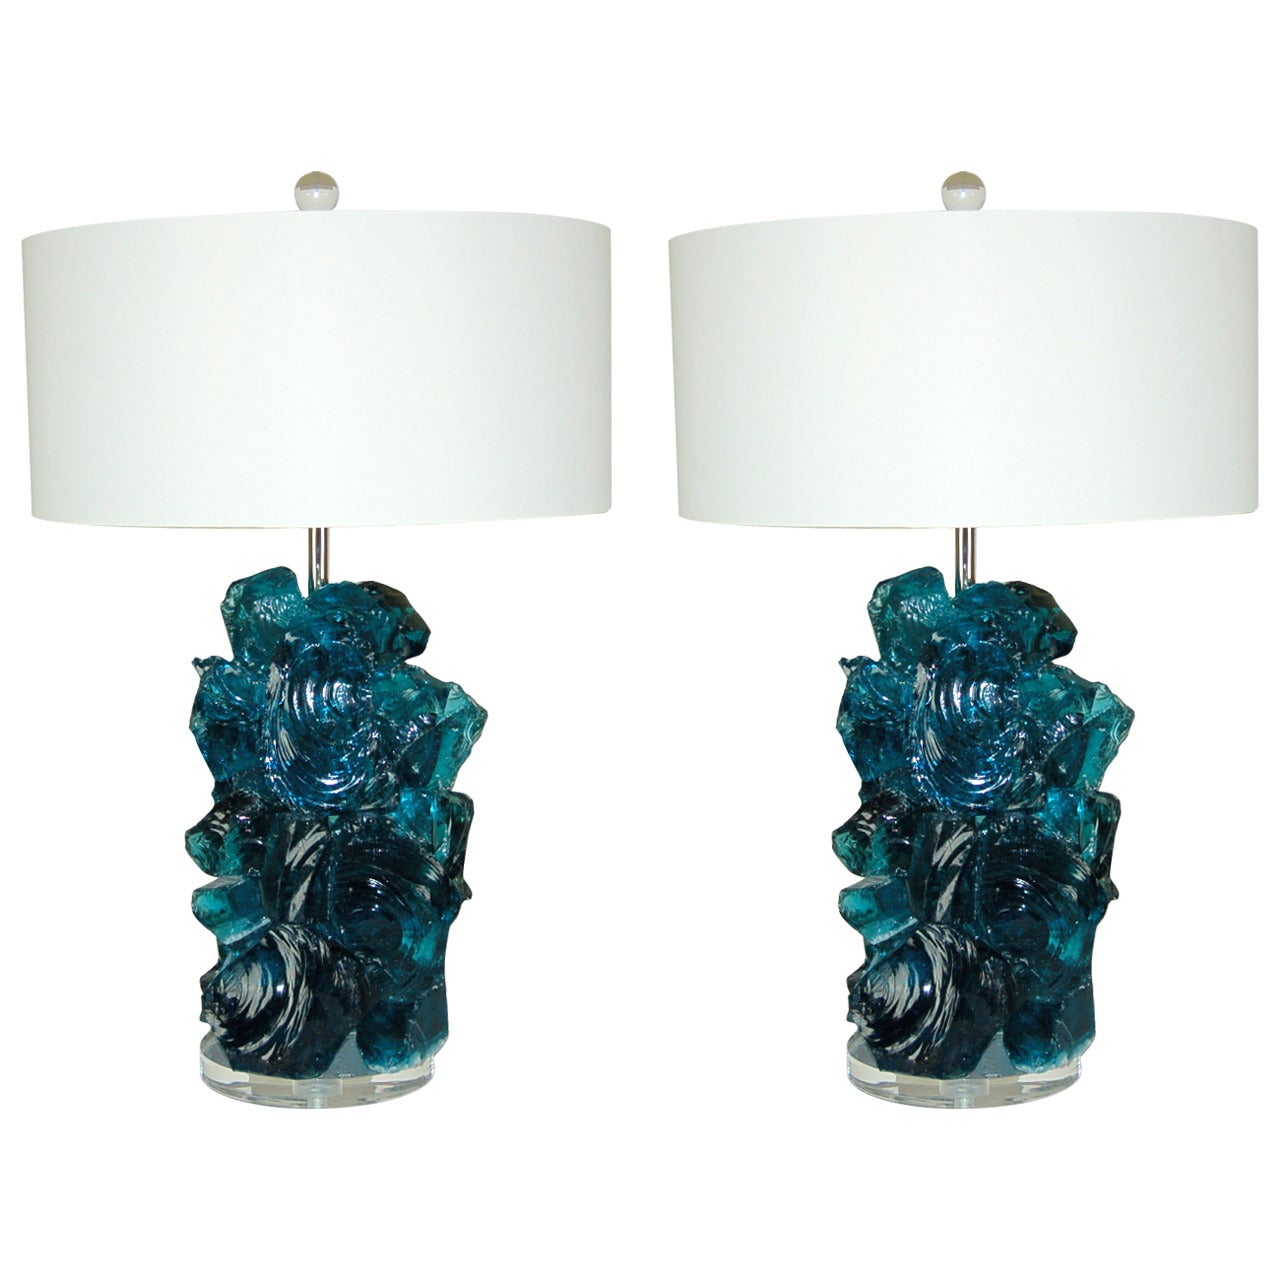 Pair of Rock Candy Lamps by Swank Lighting in Teal